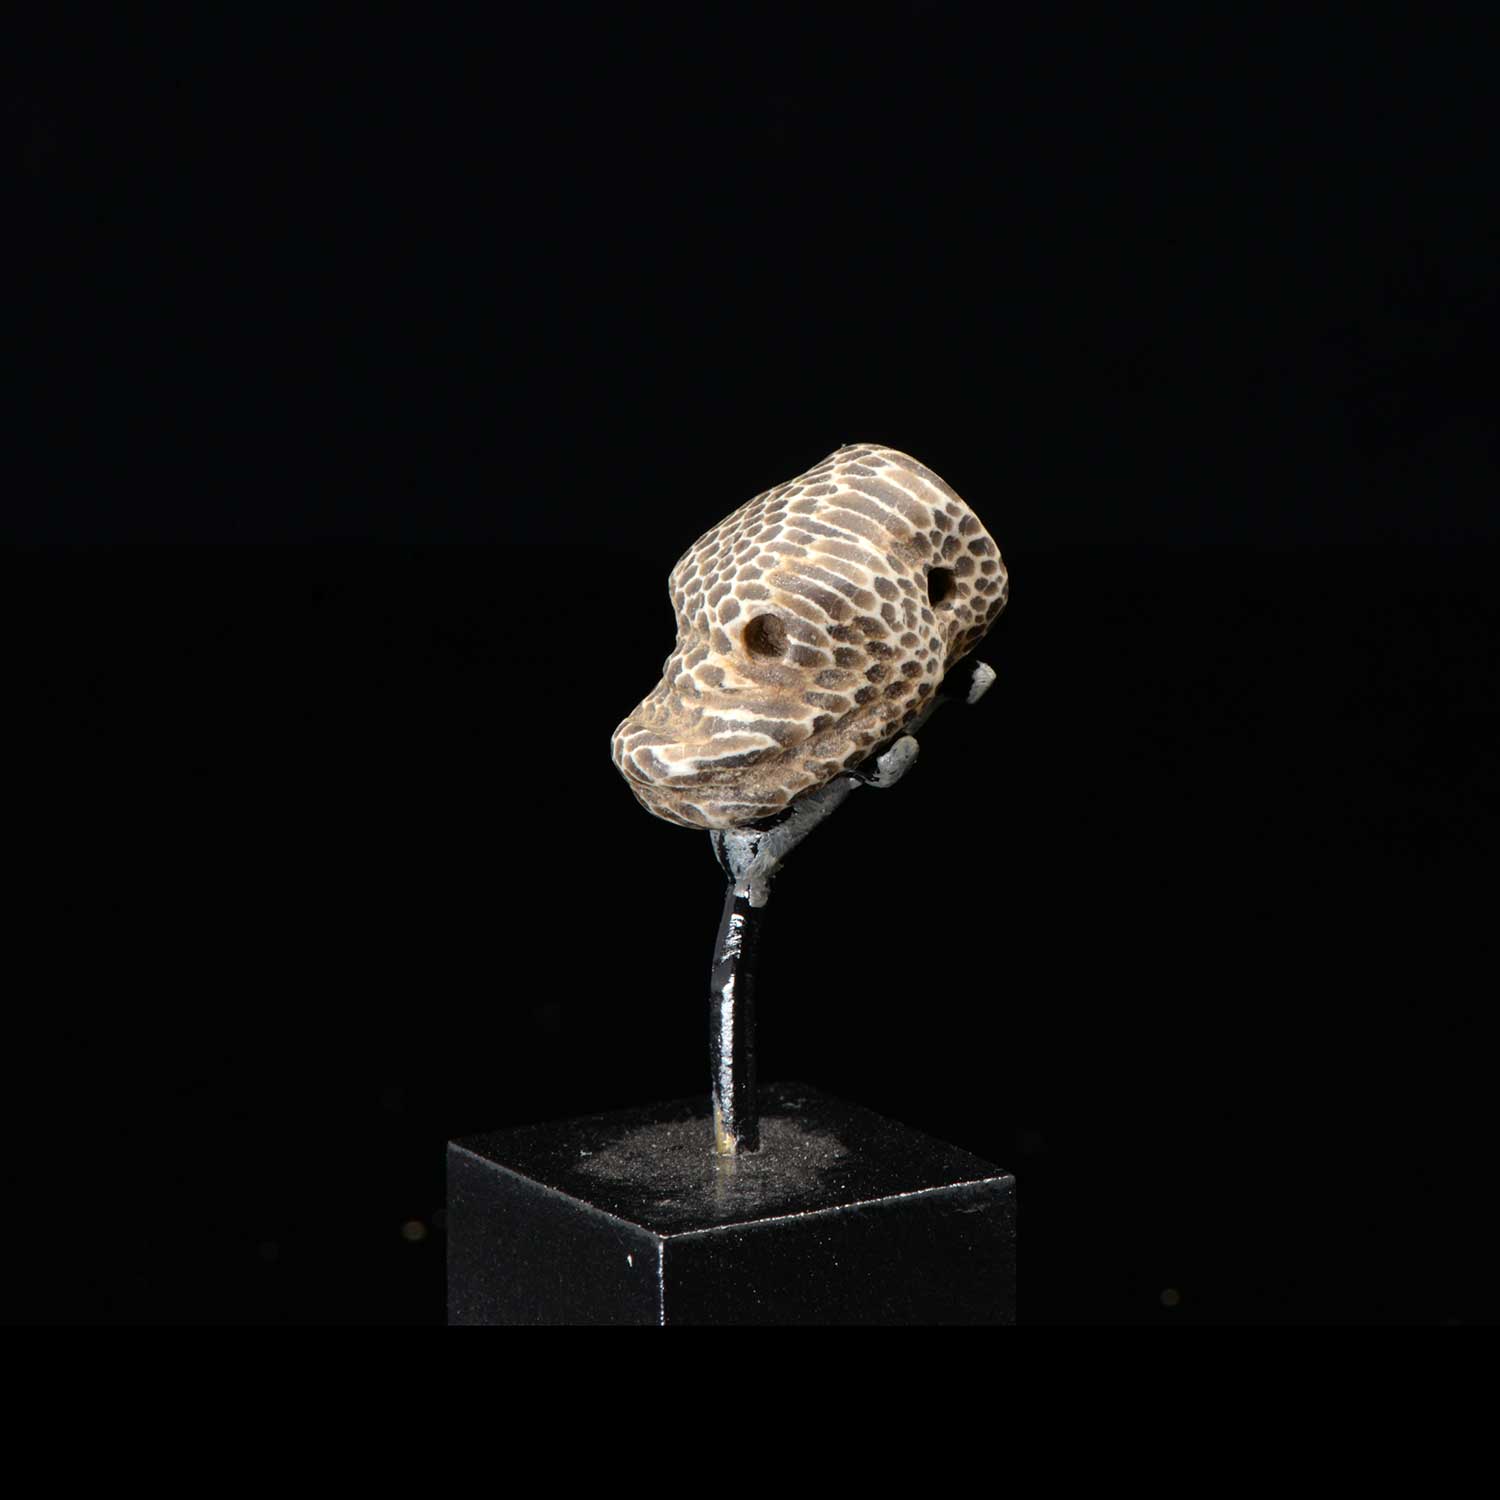 * A superb Near Eastern Snake Head Amulet, Achaemenid Period, ca. 550 - 330 BCE - Sands of Time Ancient Art